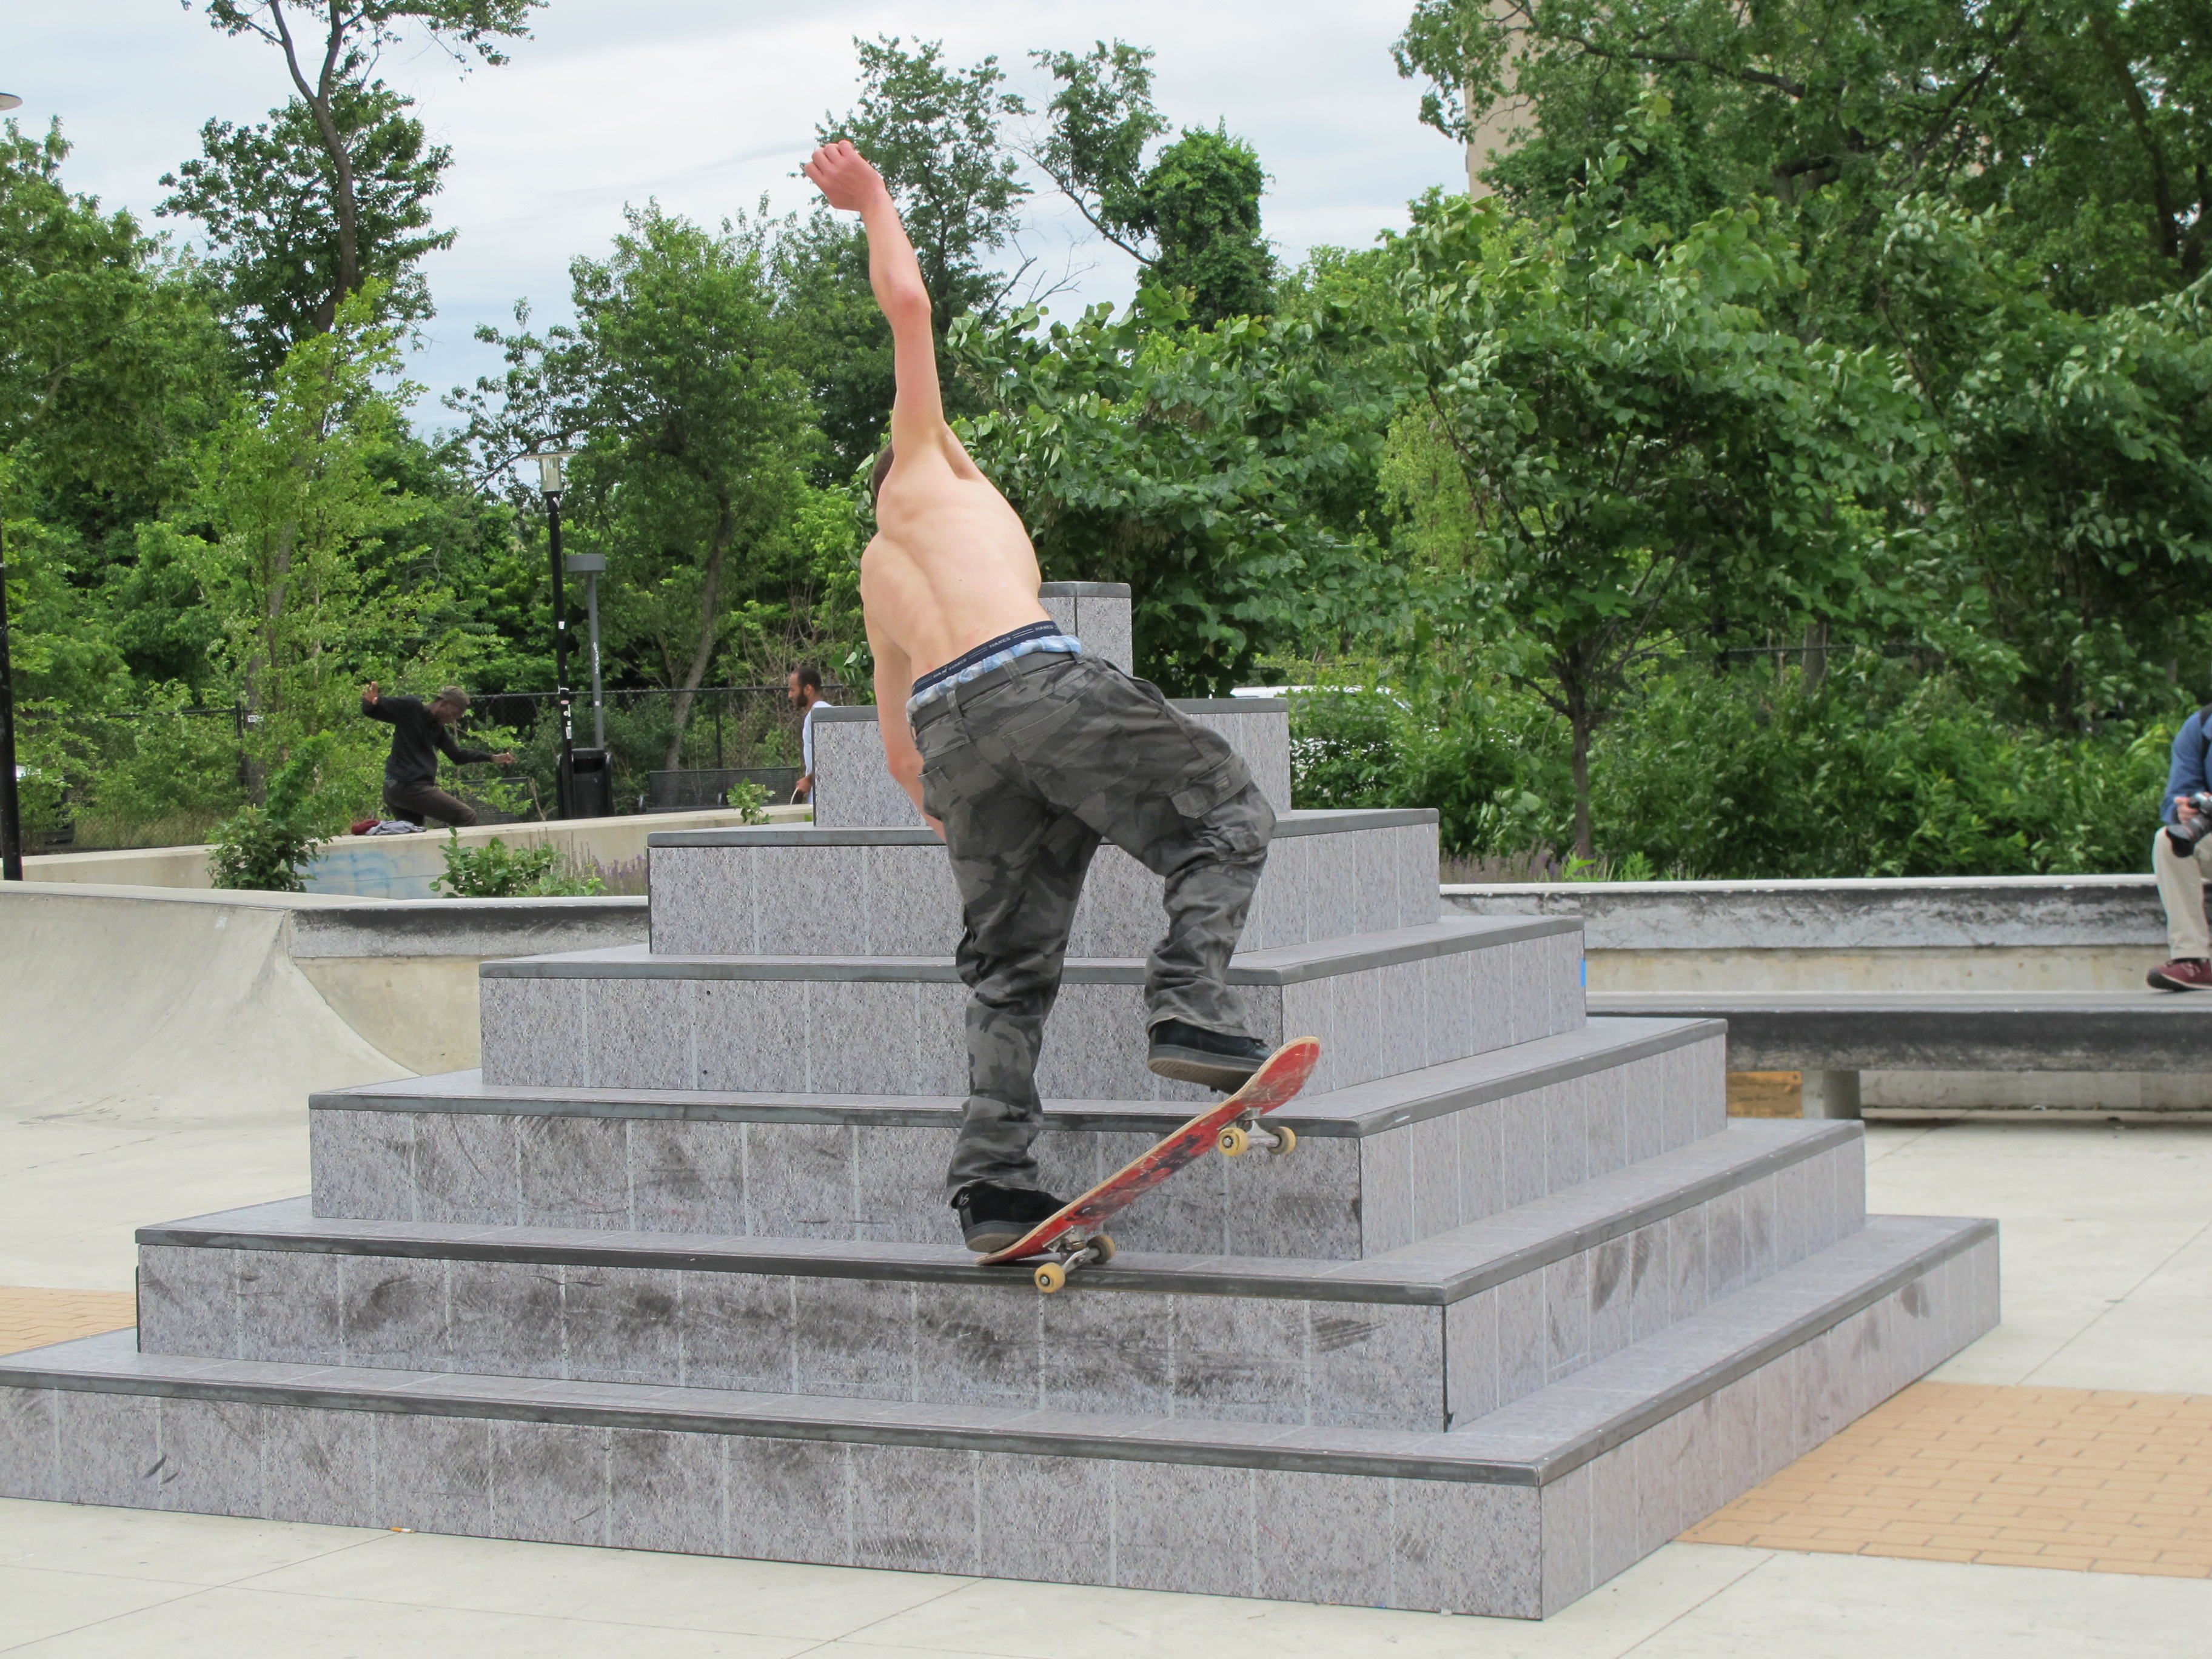 Colin Krouse testing out 'Pyramid' at Paine's Park | Ashley Hahn, PlanPhilly